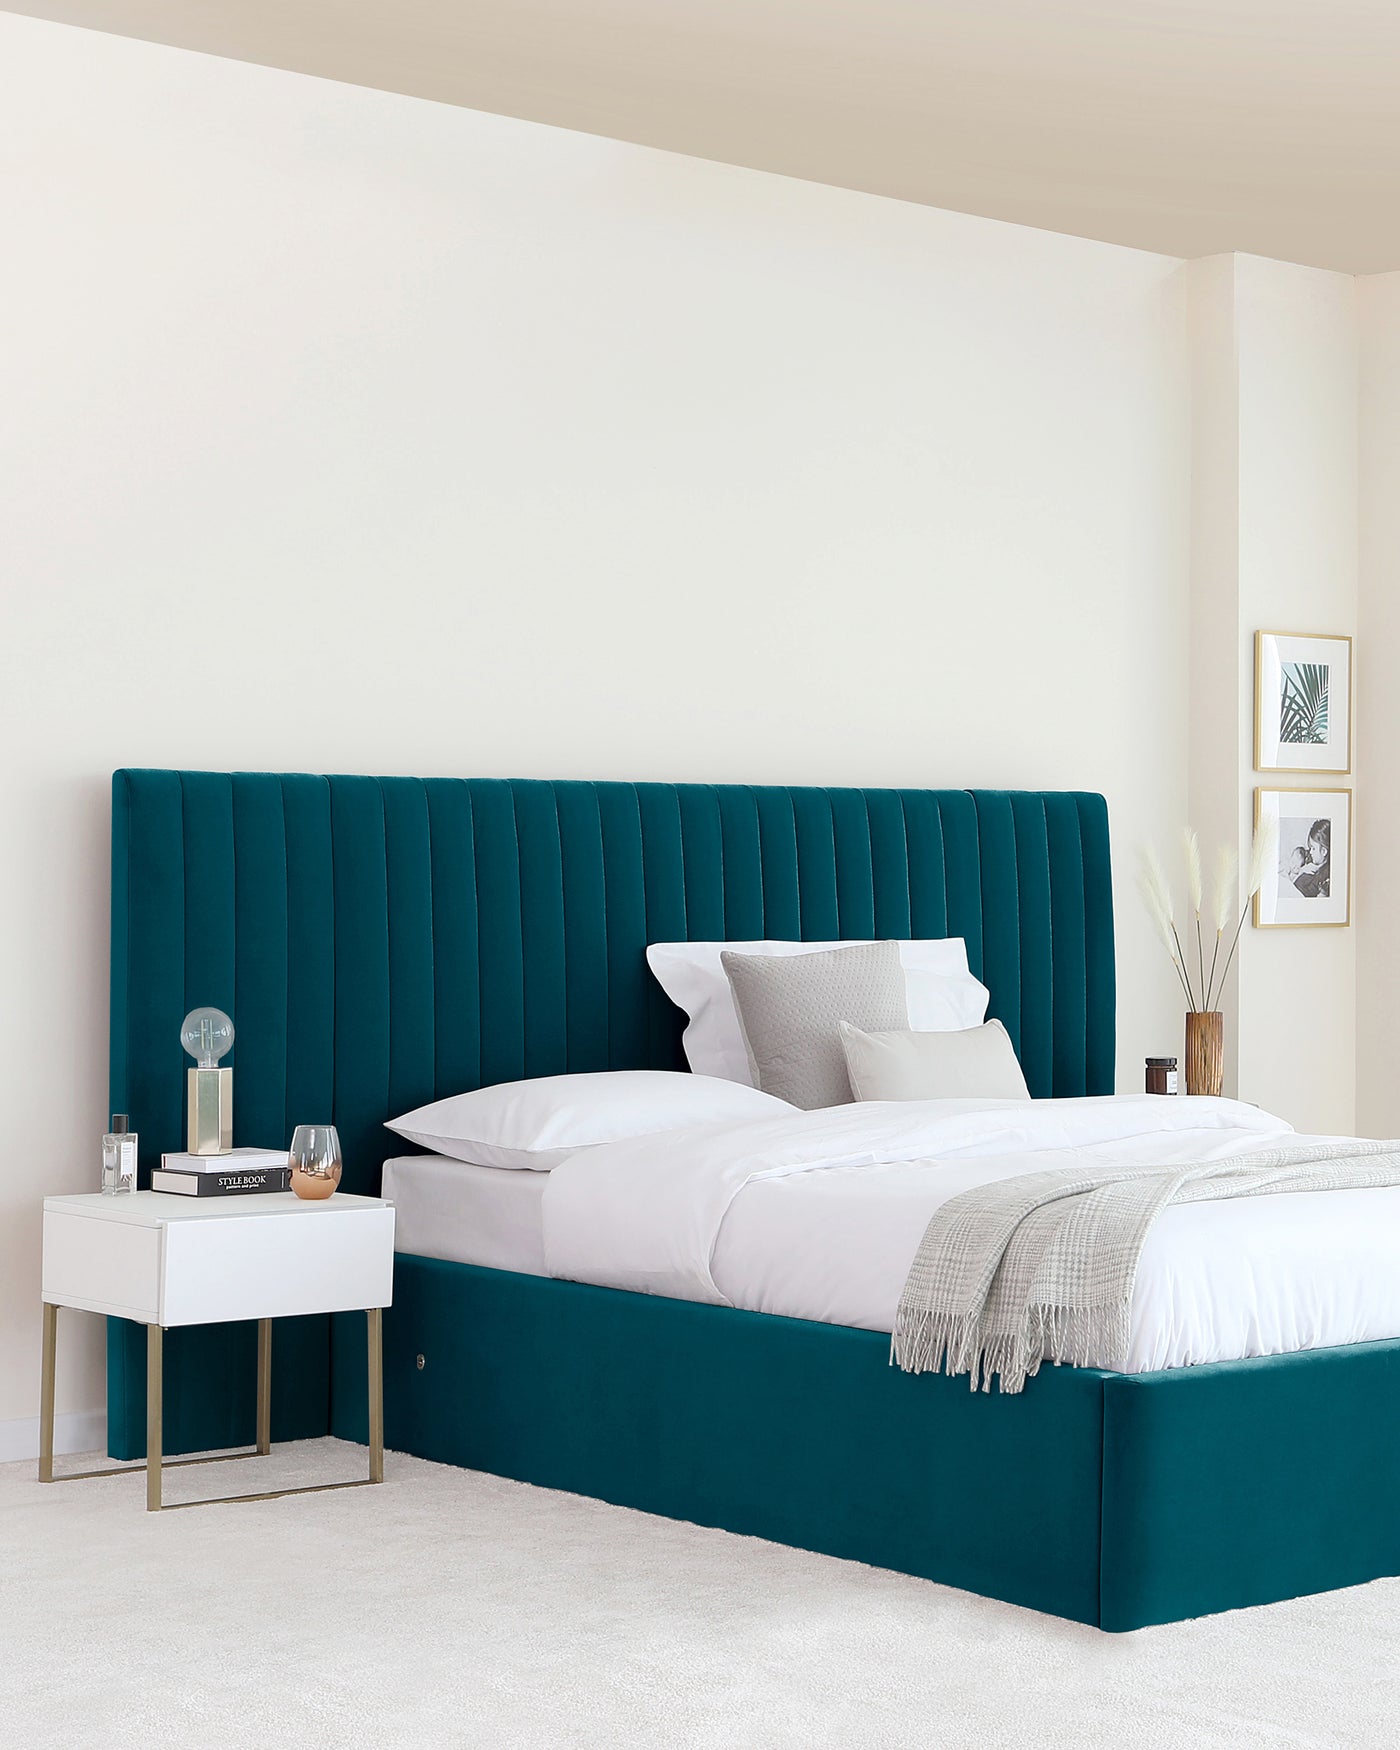 Luxurious, tall teal upholstered headboard with vertical channel tufting extending to the base of the bed, paired with a white modern nightstand featuring gold metal legs.